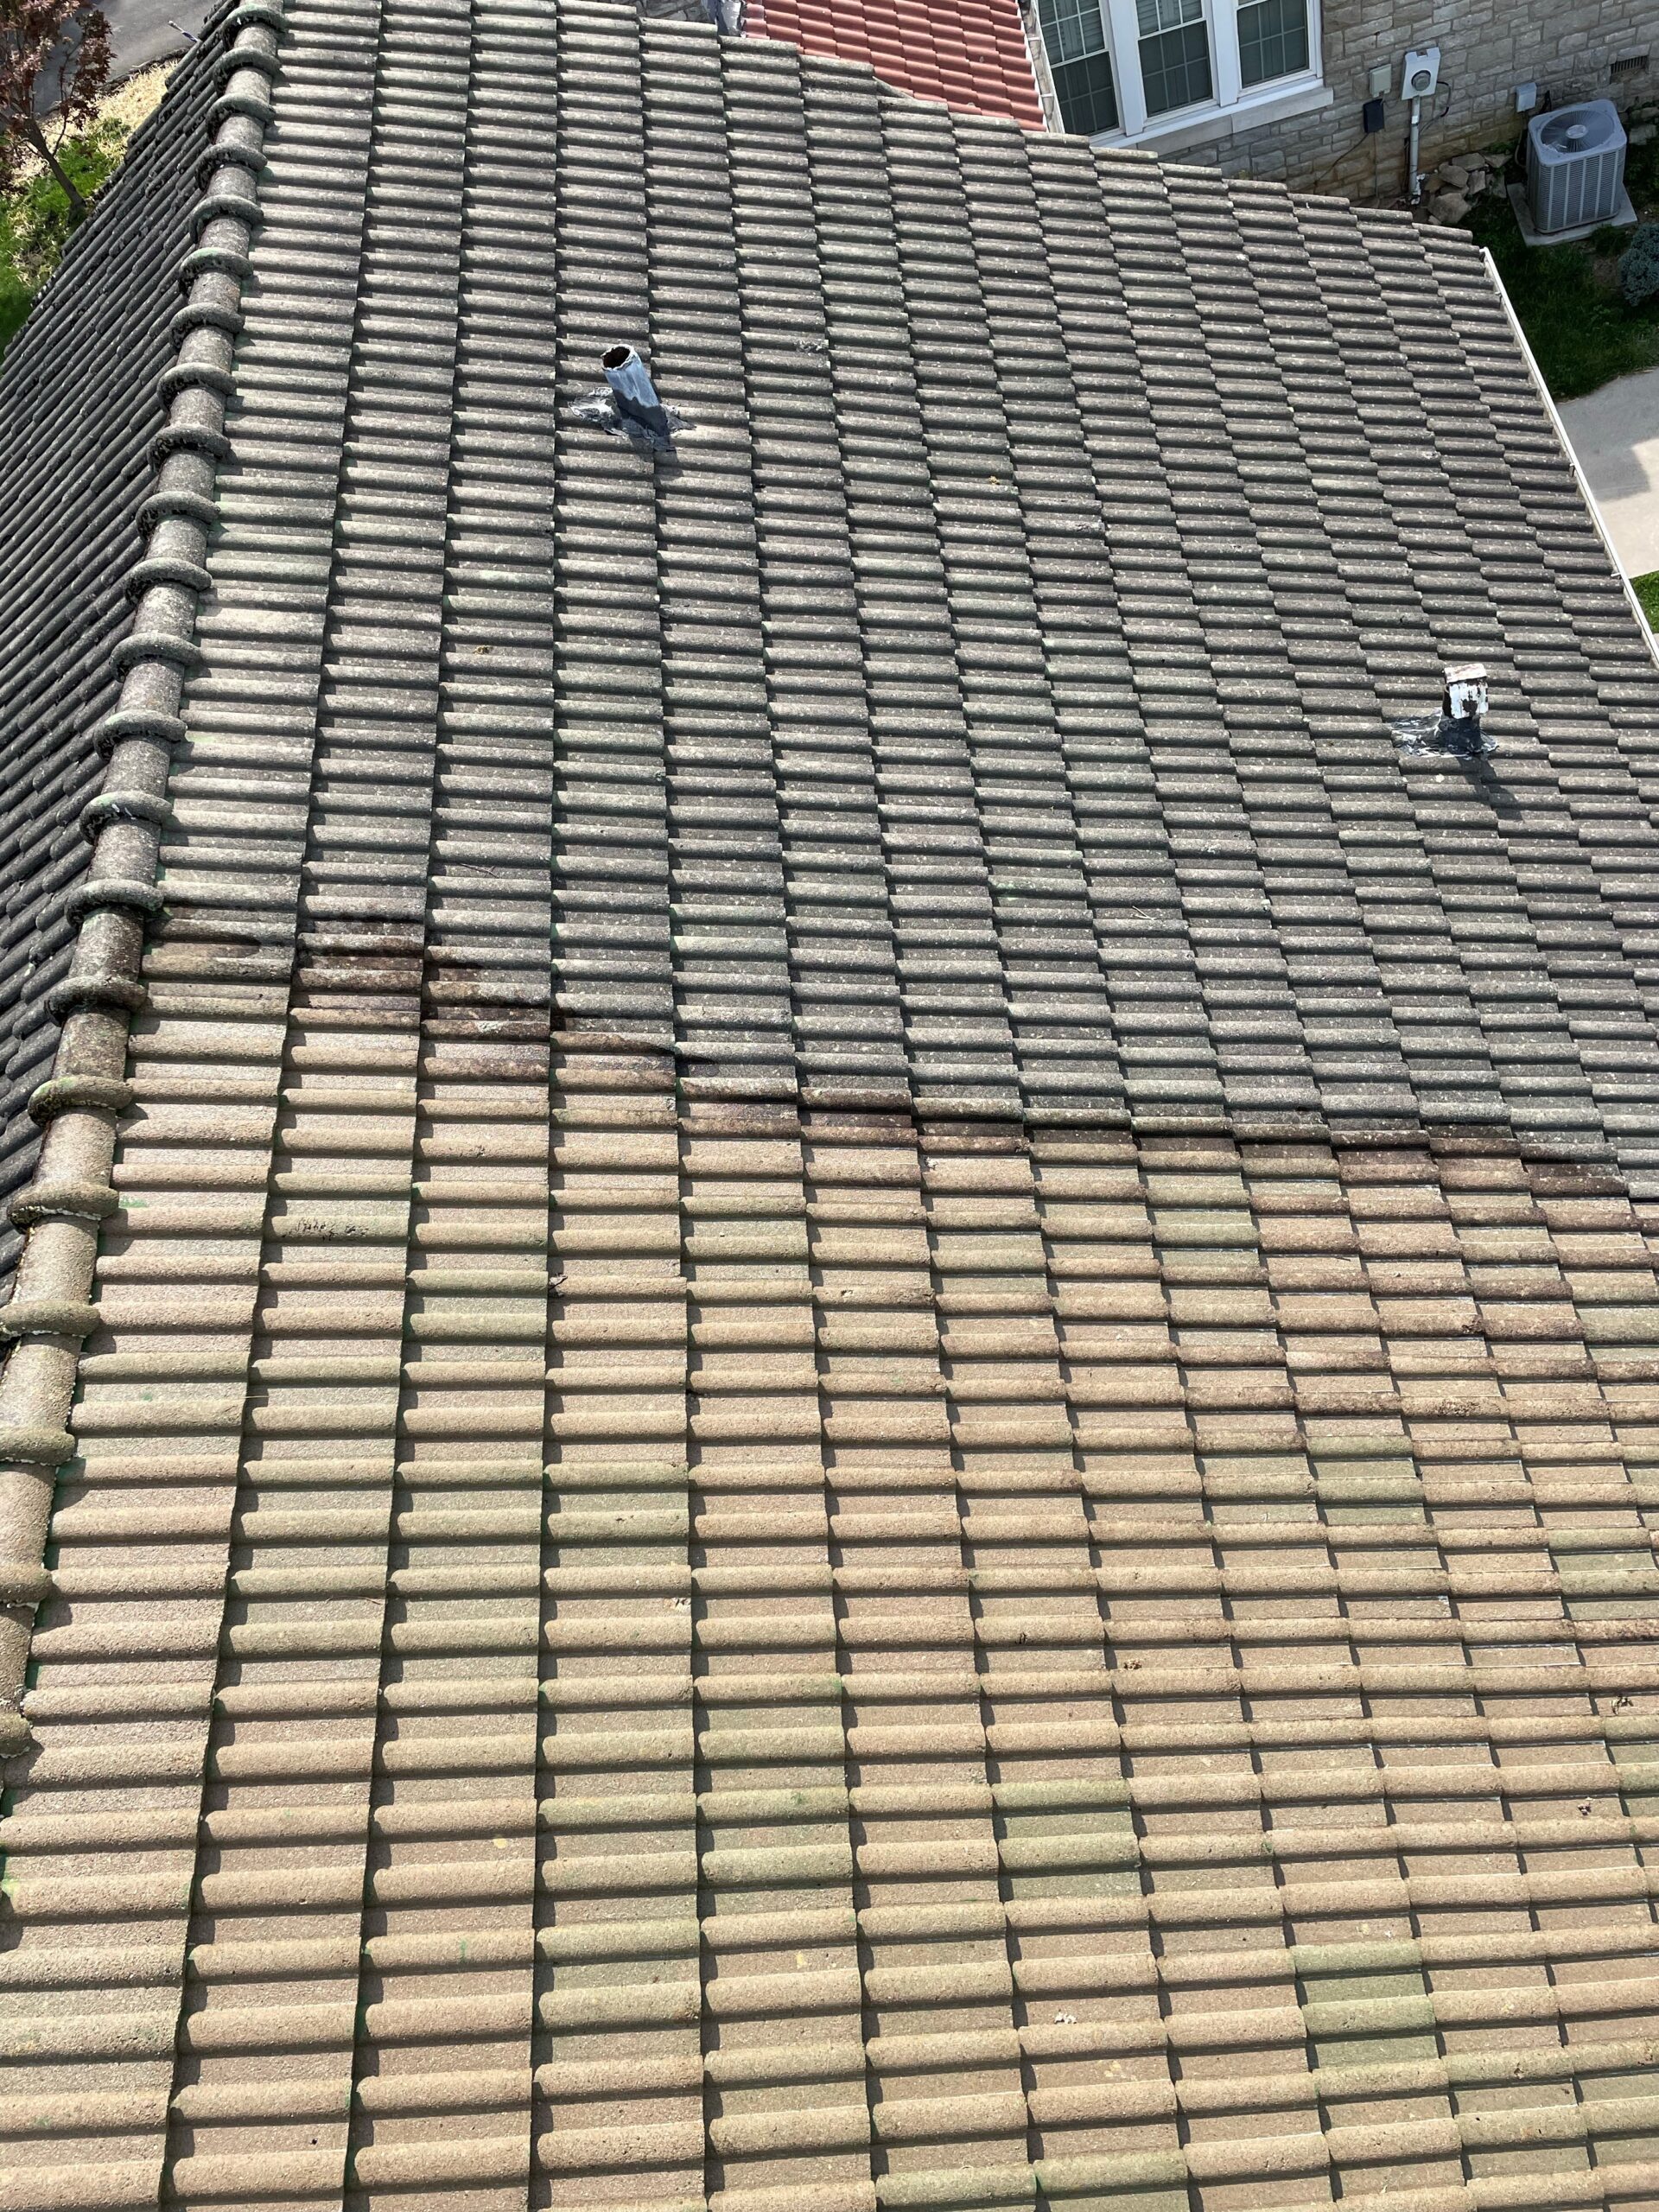 cleaning-tile-roof